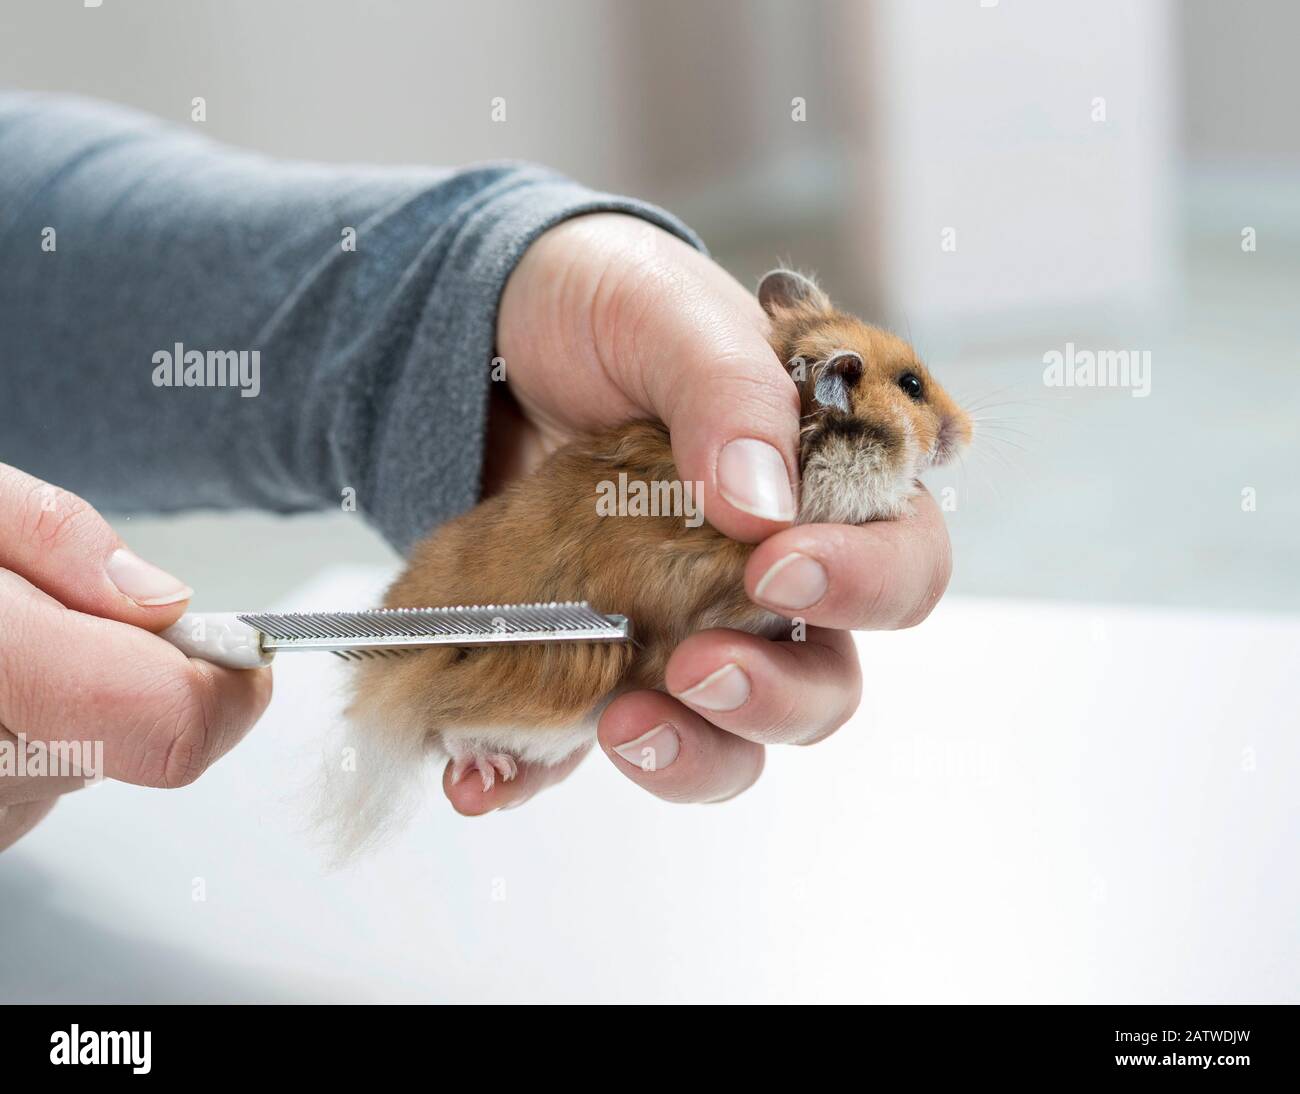 Grooming a longhaired pet Hamster (Mesocricetus auratus). Germany. Stock Photo